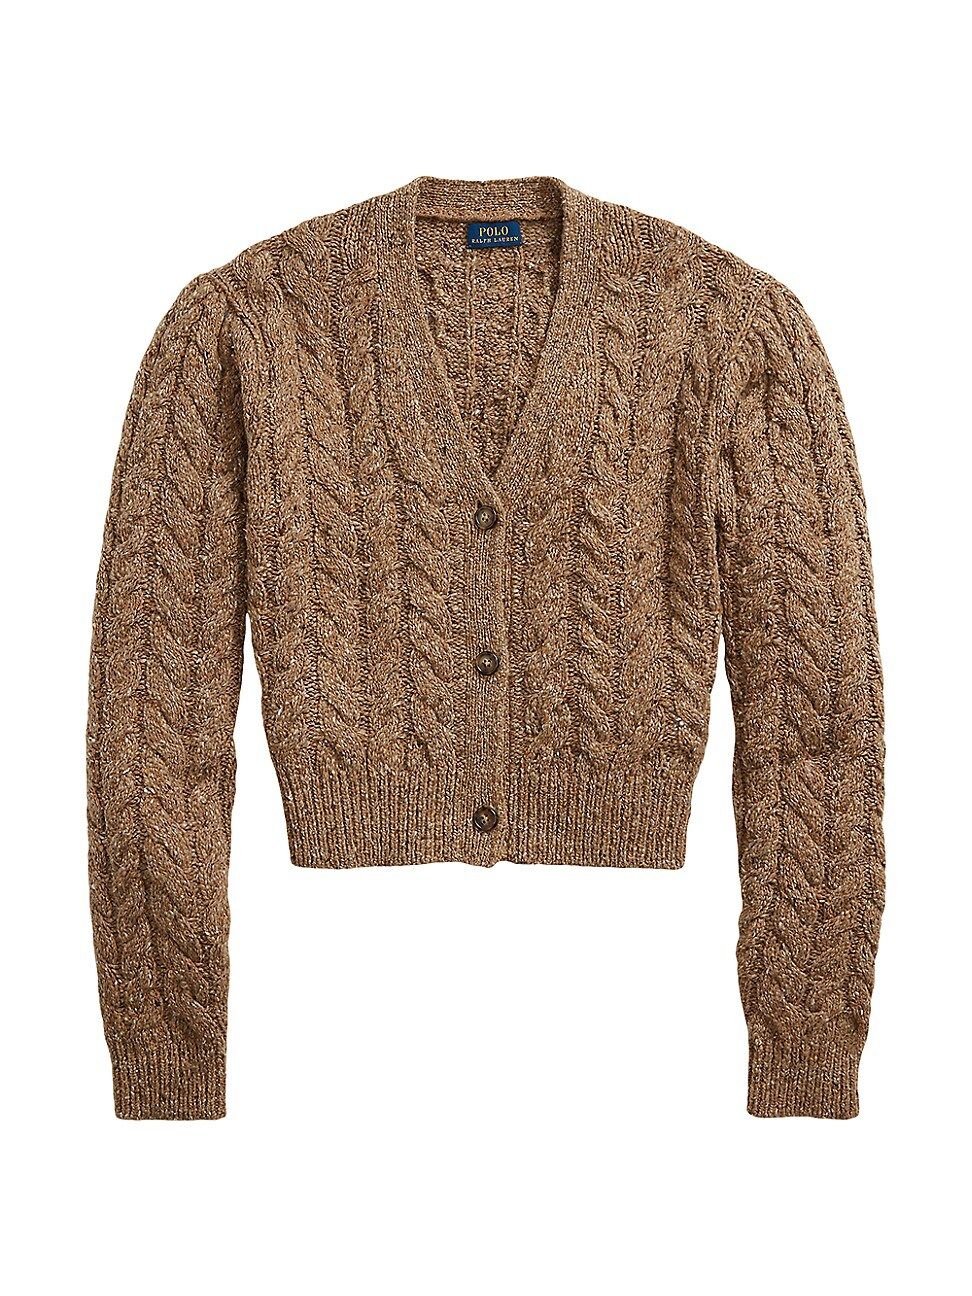 Women's Cropped Cable Cardigan - Camel Donegal - Size Medium | Saks Fifth Avenue